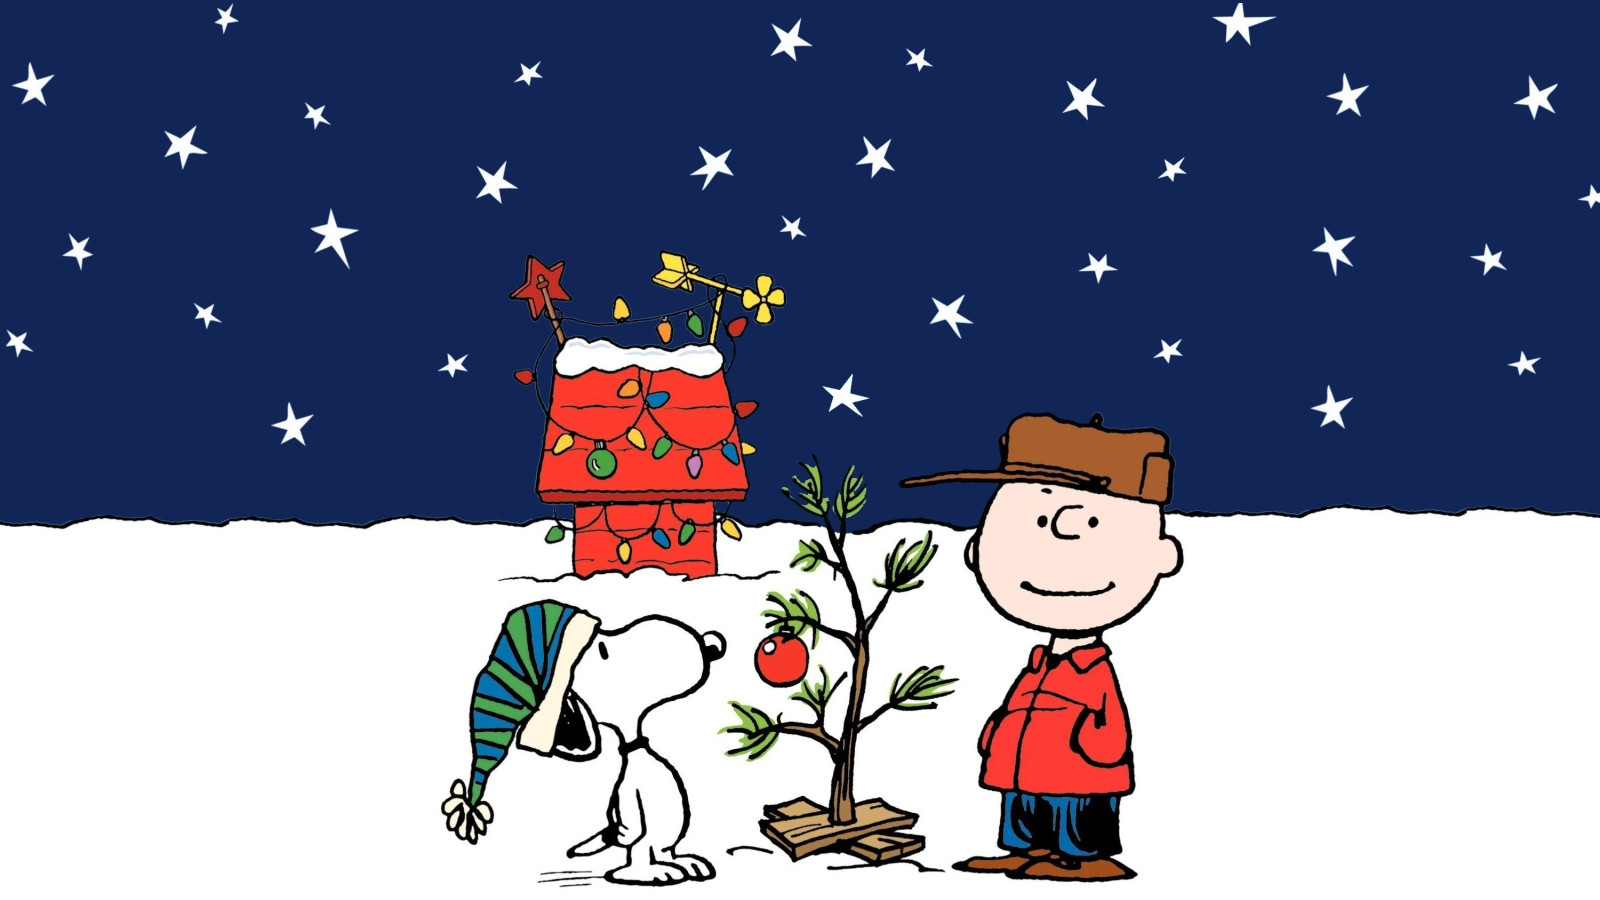 Snoopy Christmas Pictures Full Desktop Background